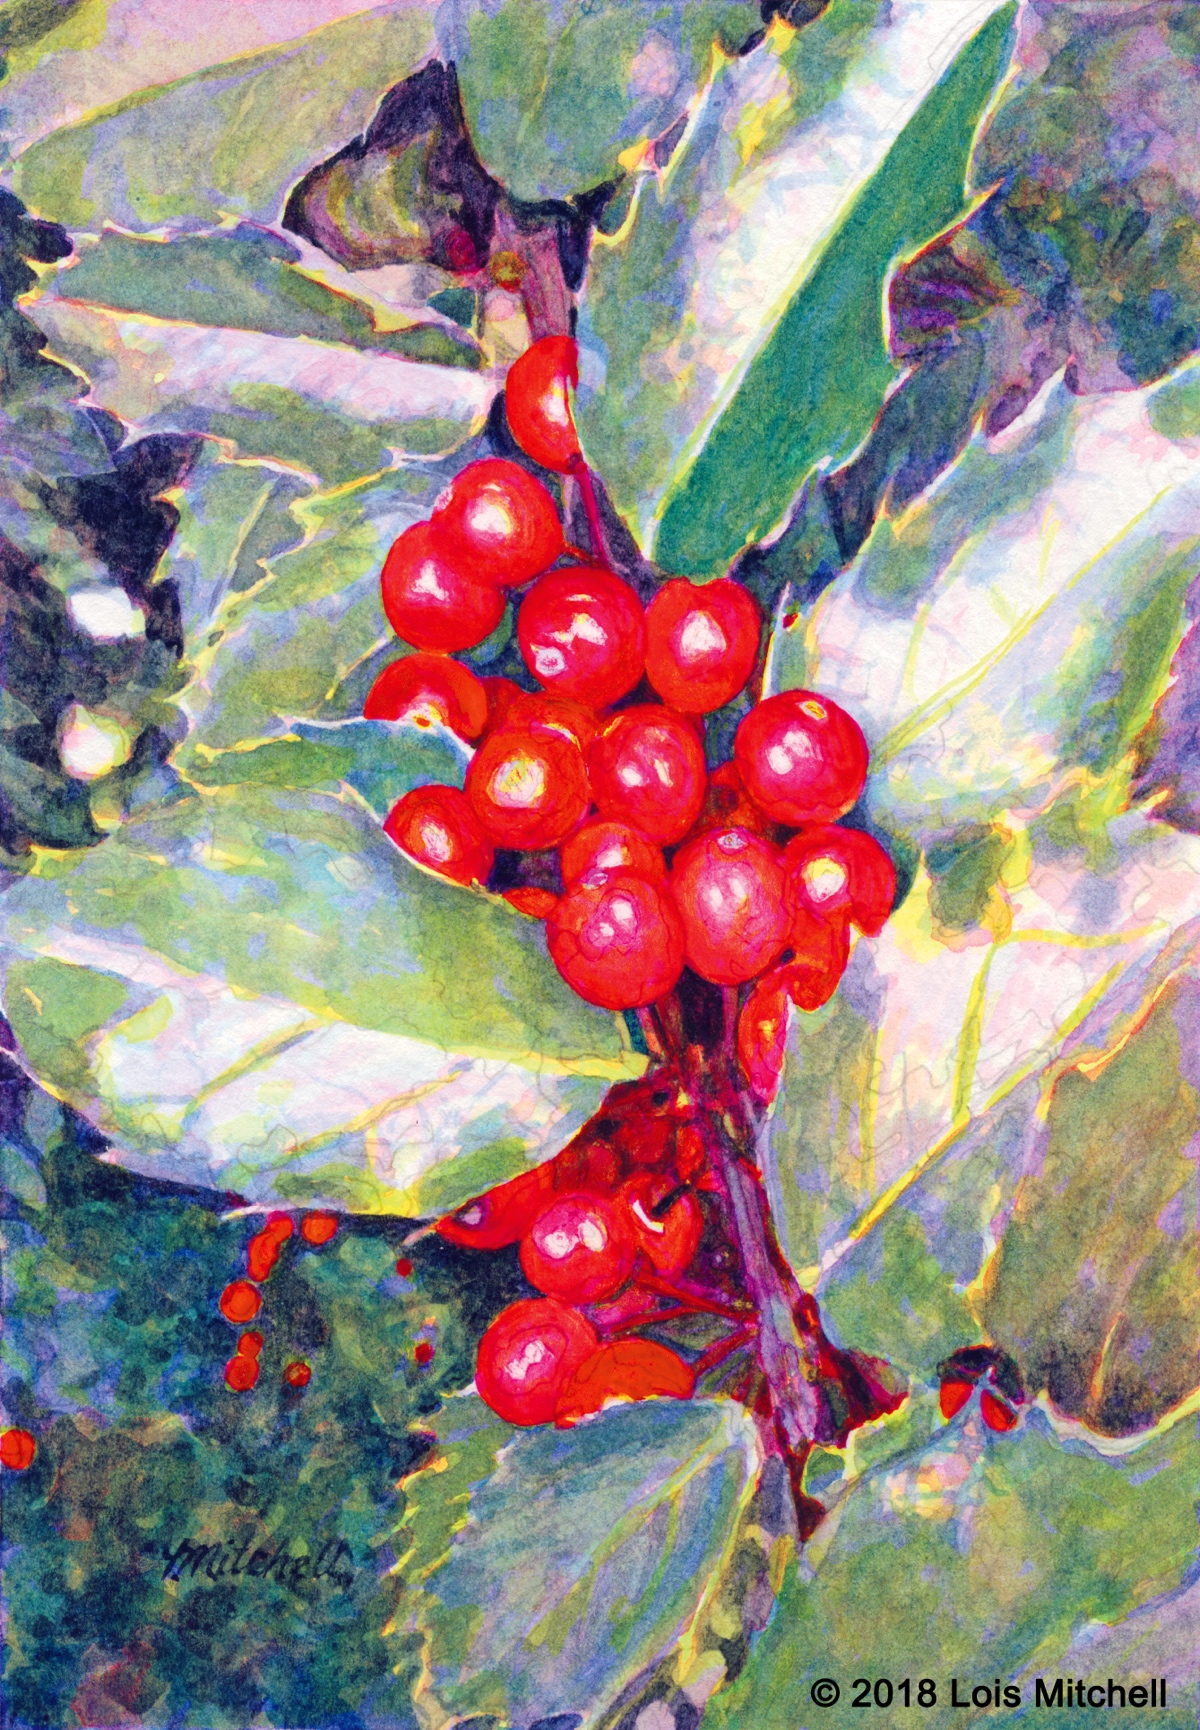 painting of berries by Lois